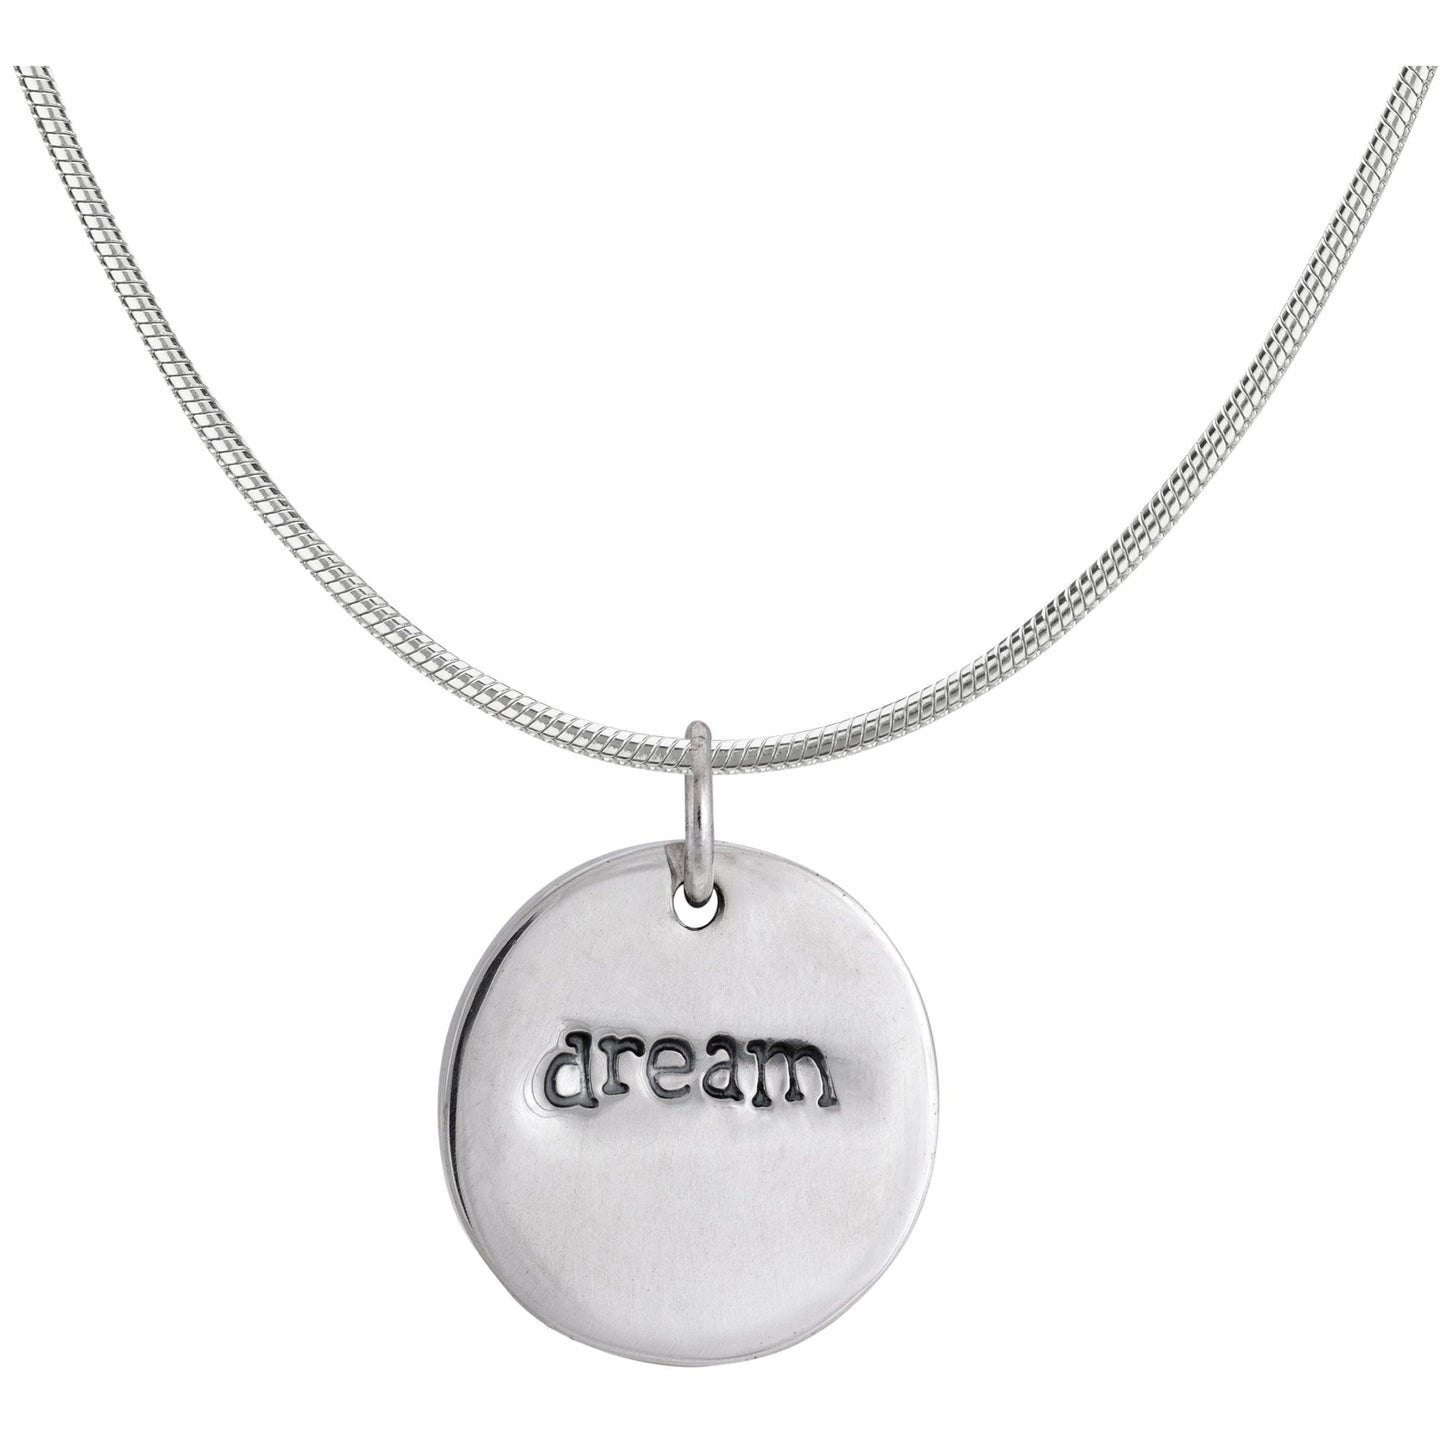 Believe Dream Double Sided Sterling Necklace